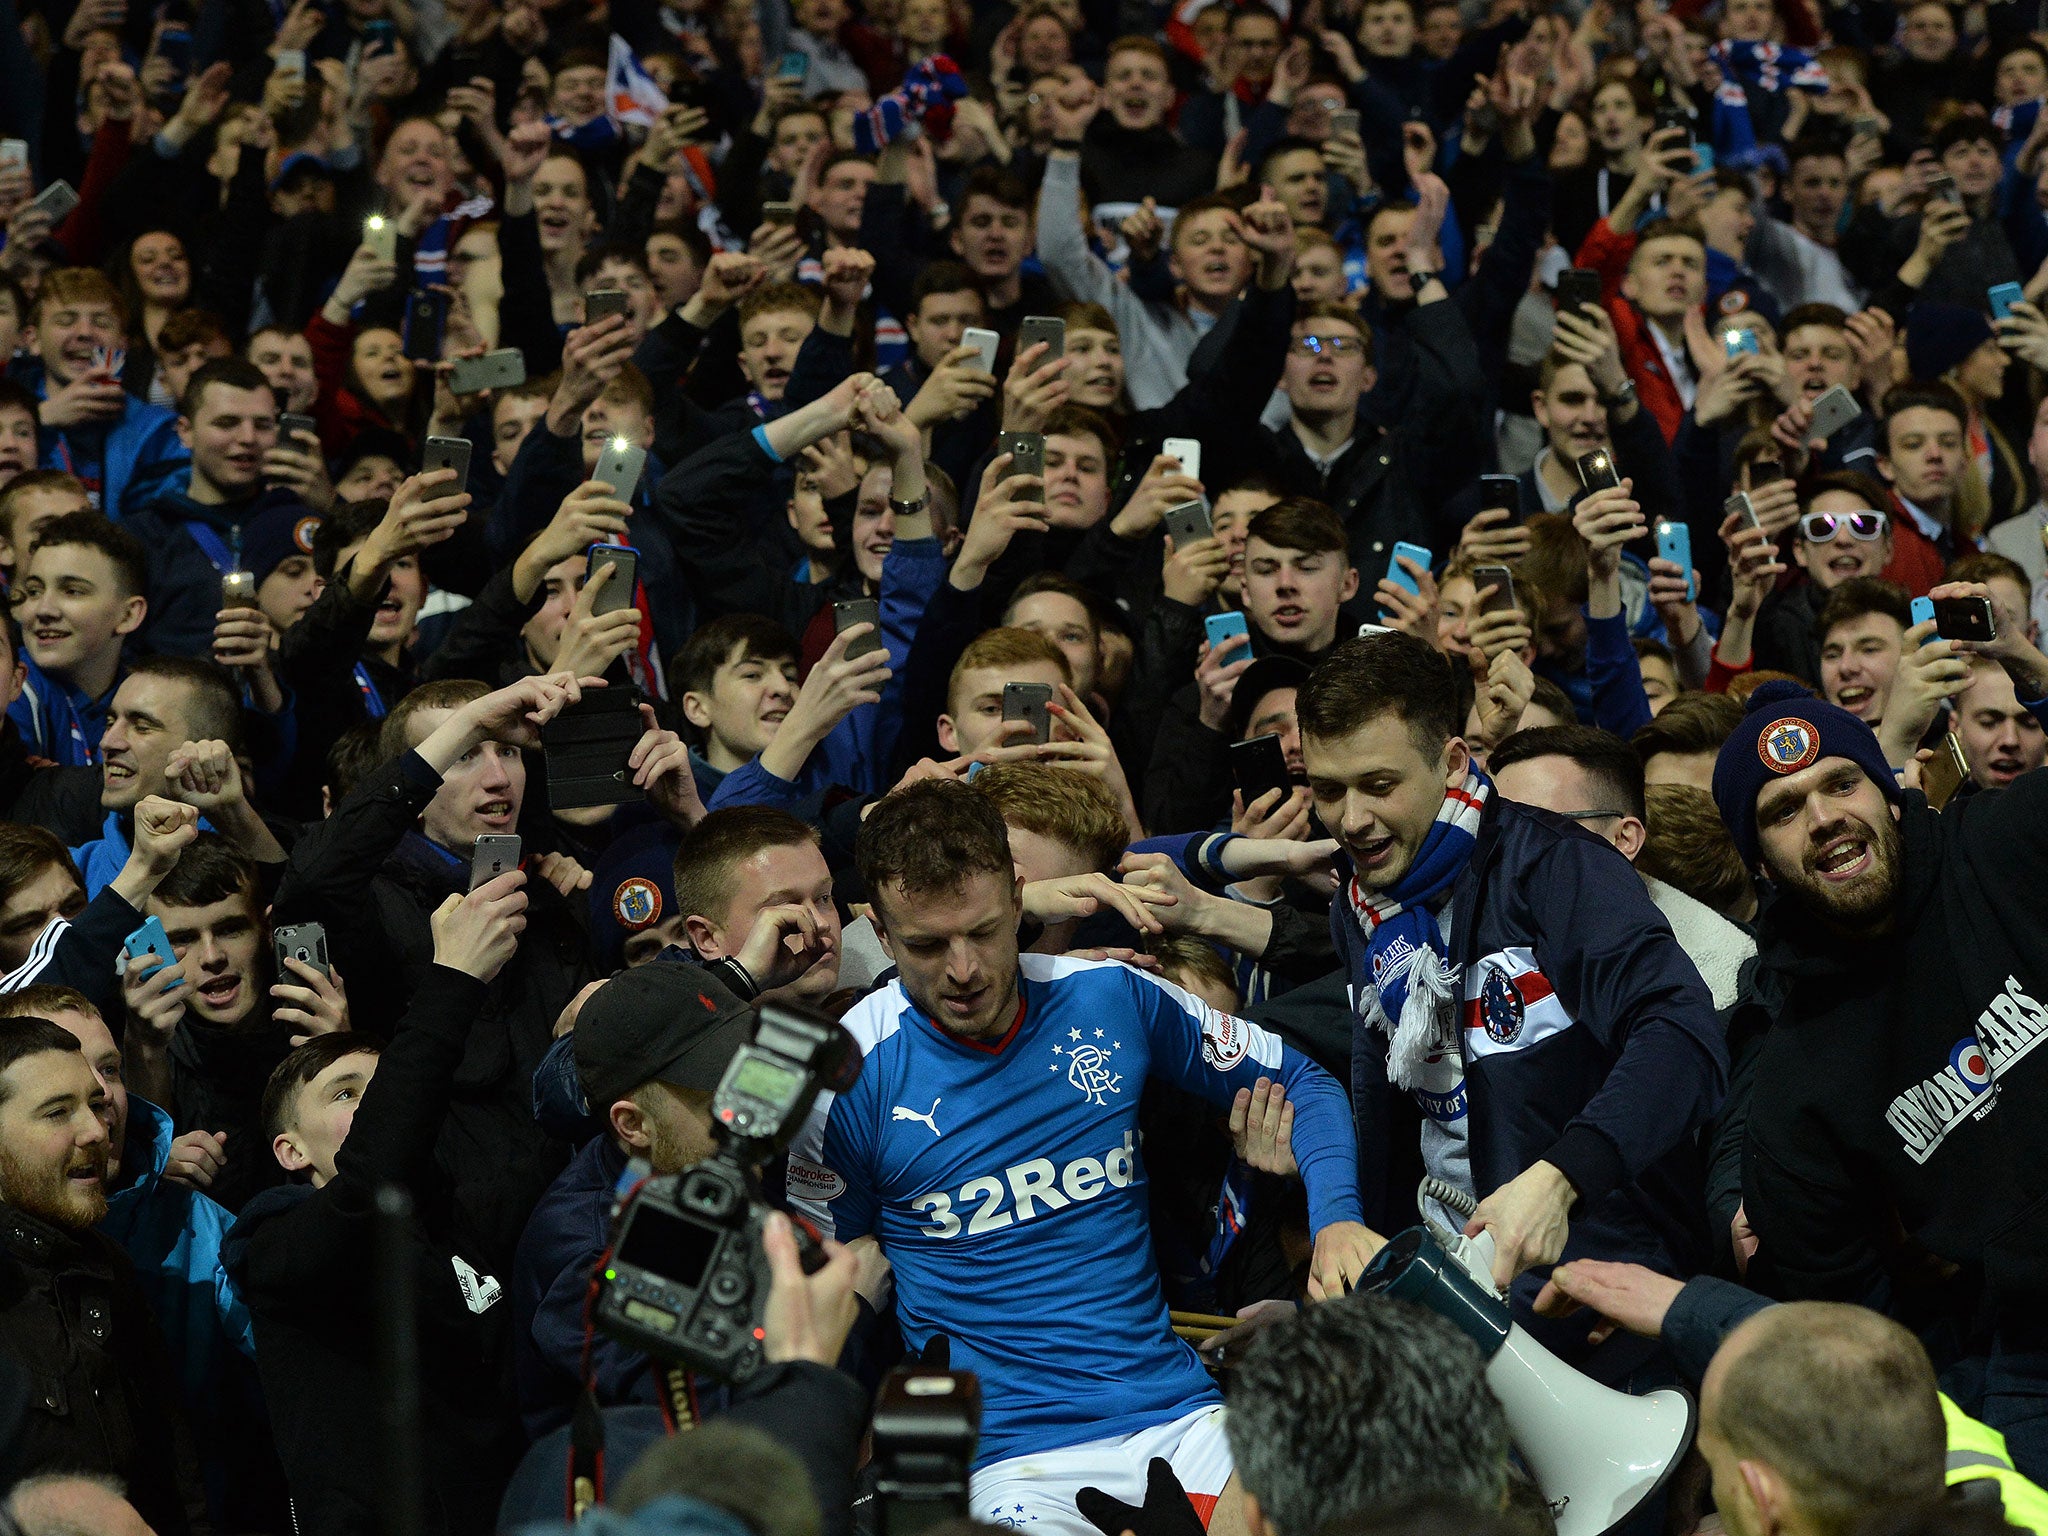 Andy Halliday joins Rangers supporters after securing promotion